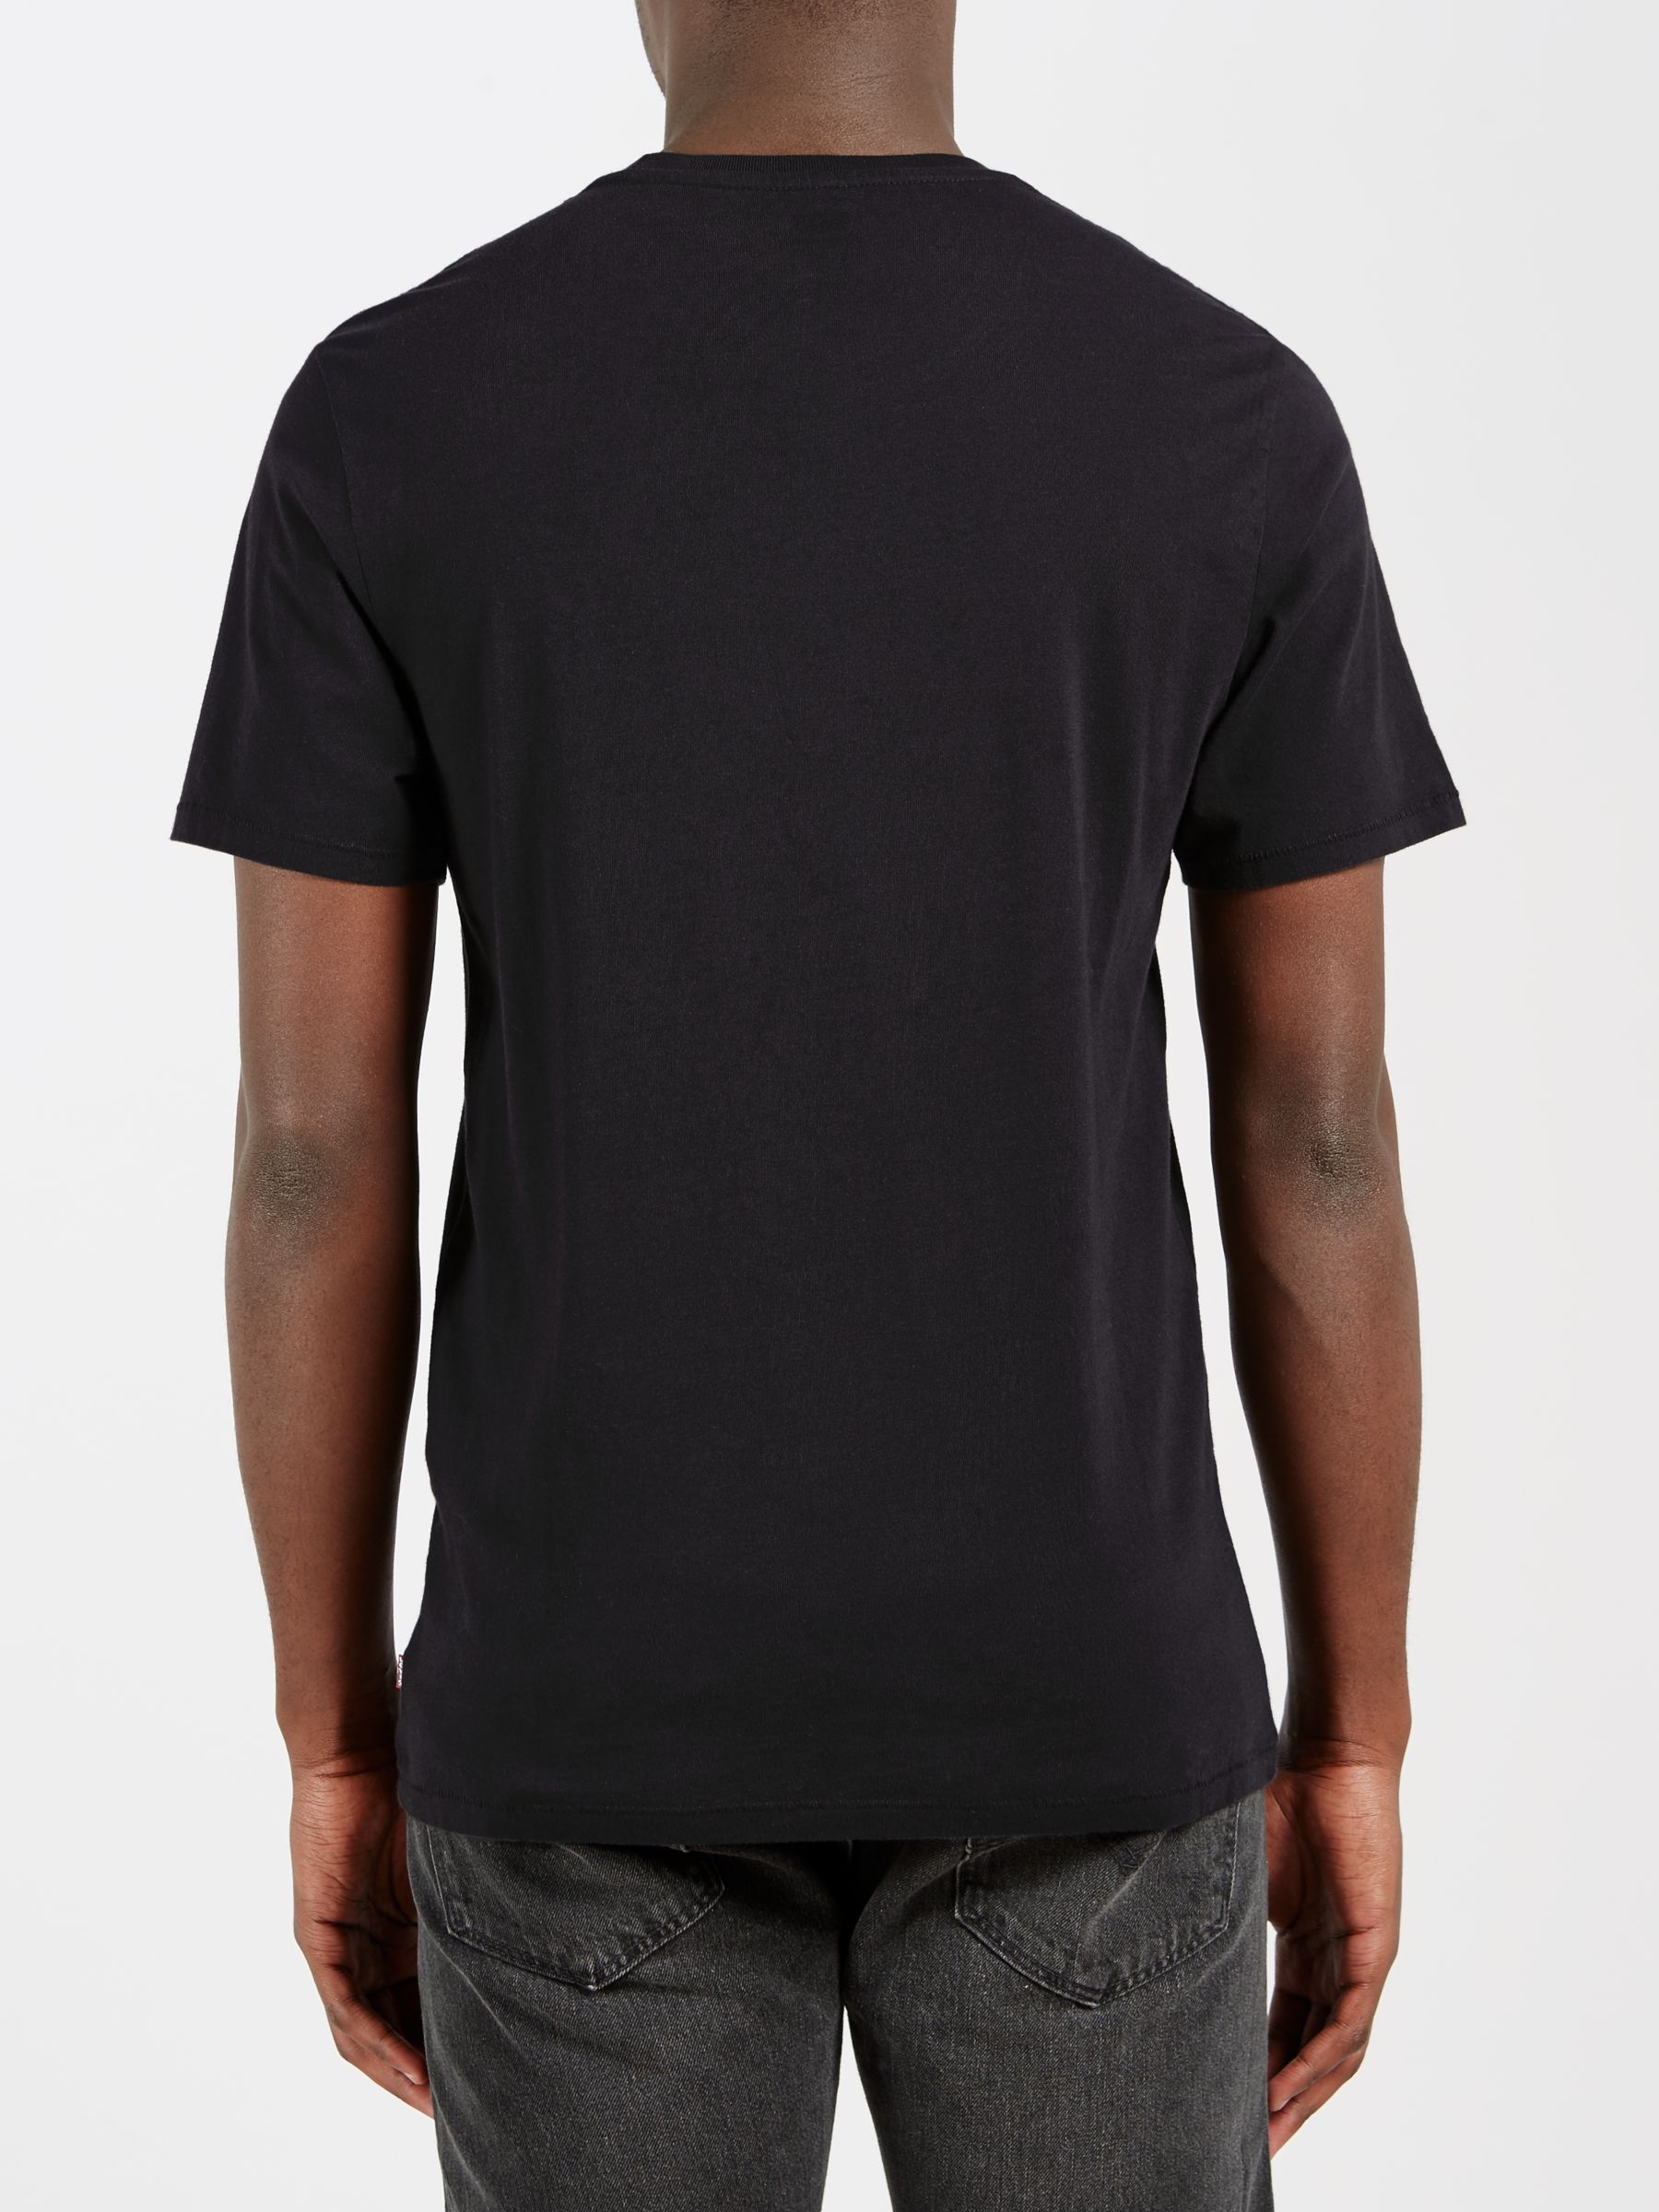 Levi's Two Horse Graphic T-Shirt